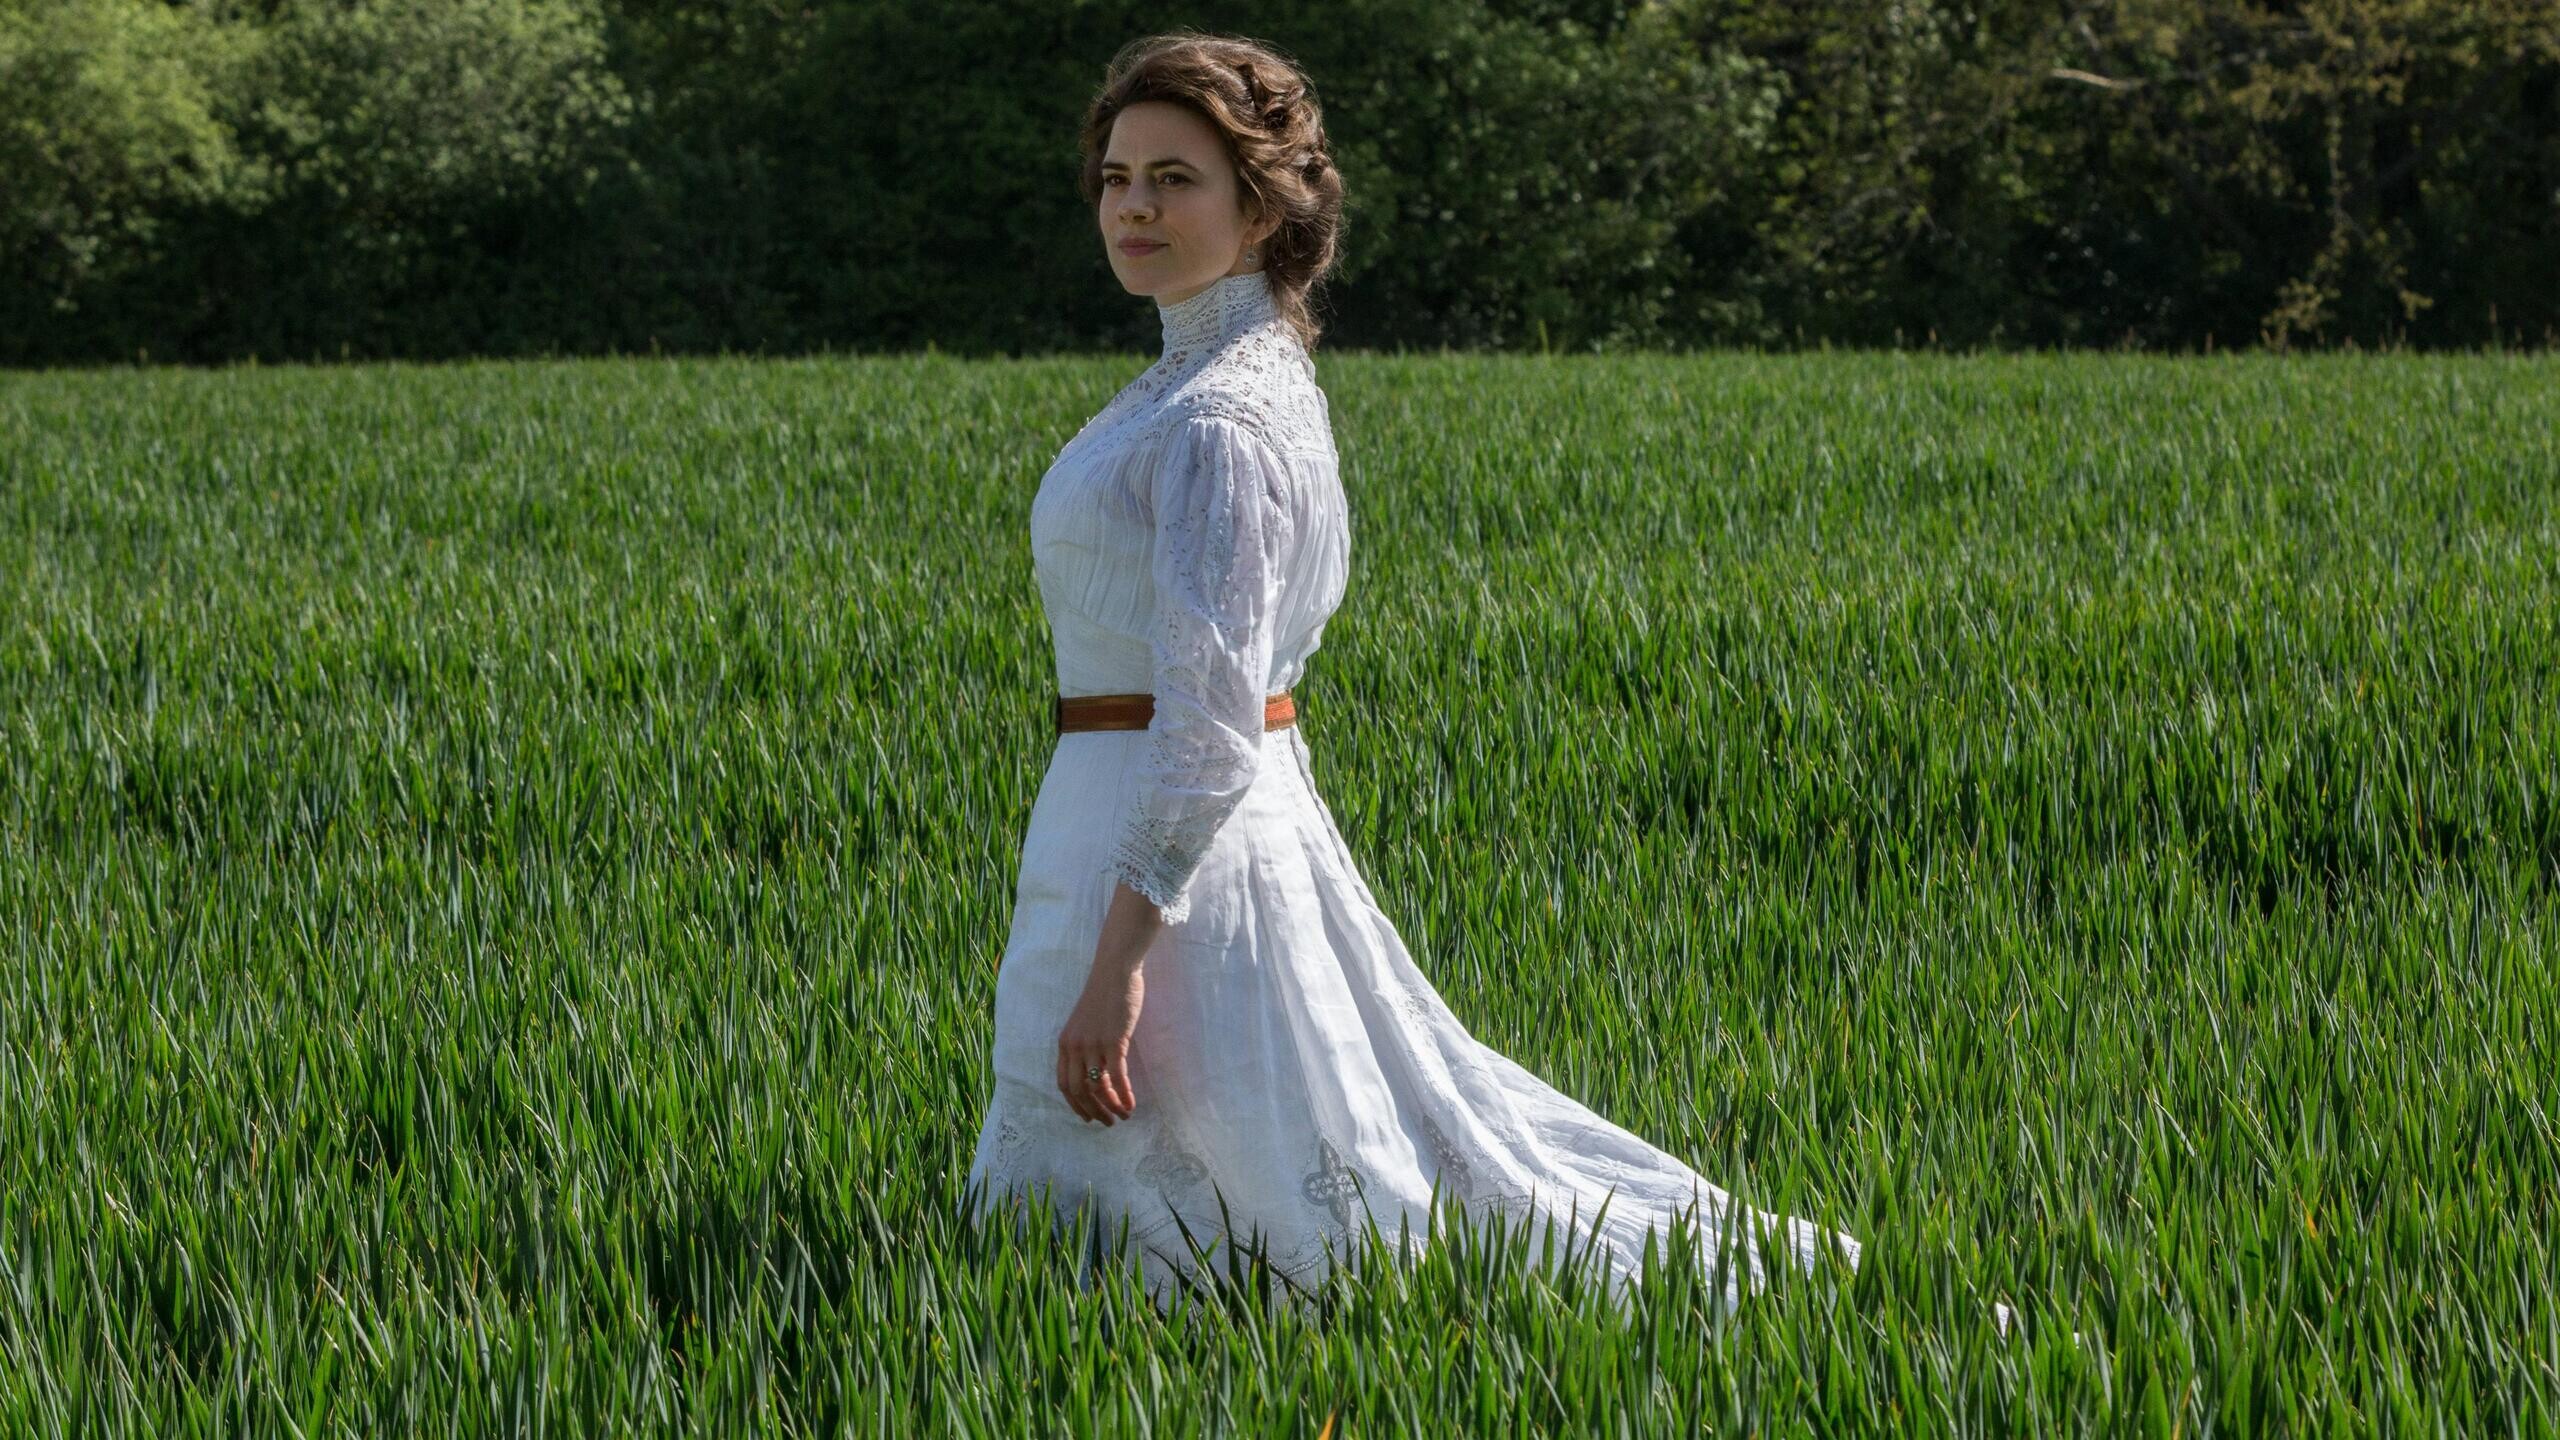 Hayley Atwell: Margaret Schlegel in white dress, Howards End, Television drama based on the 1910 novel by E. M. Forster. 2560x1440 HD Wallpaper.